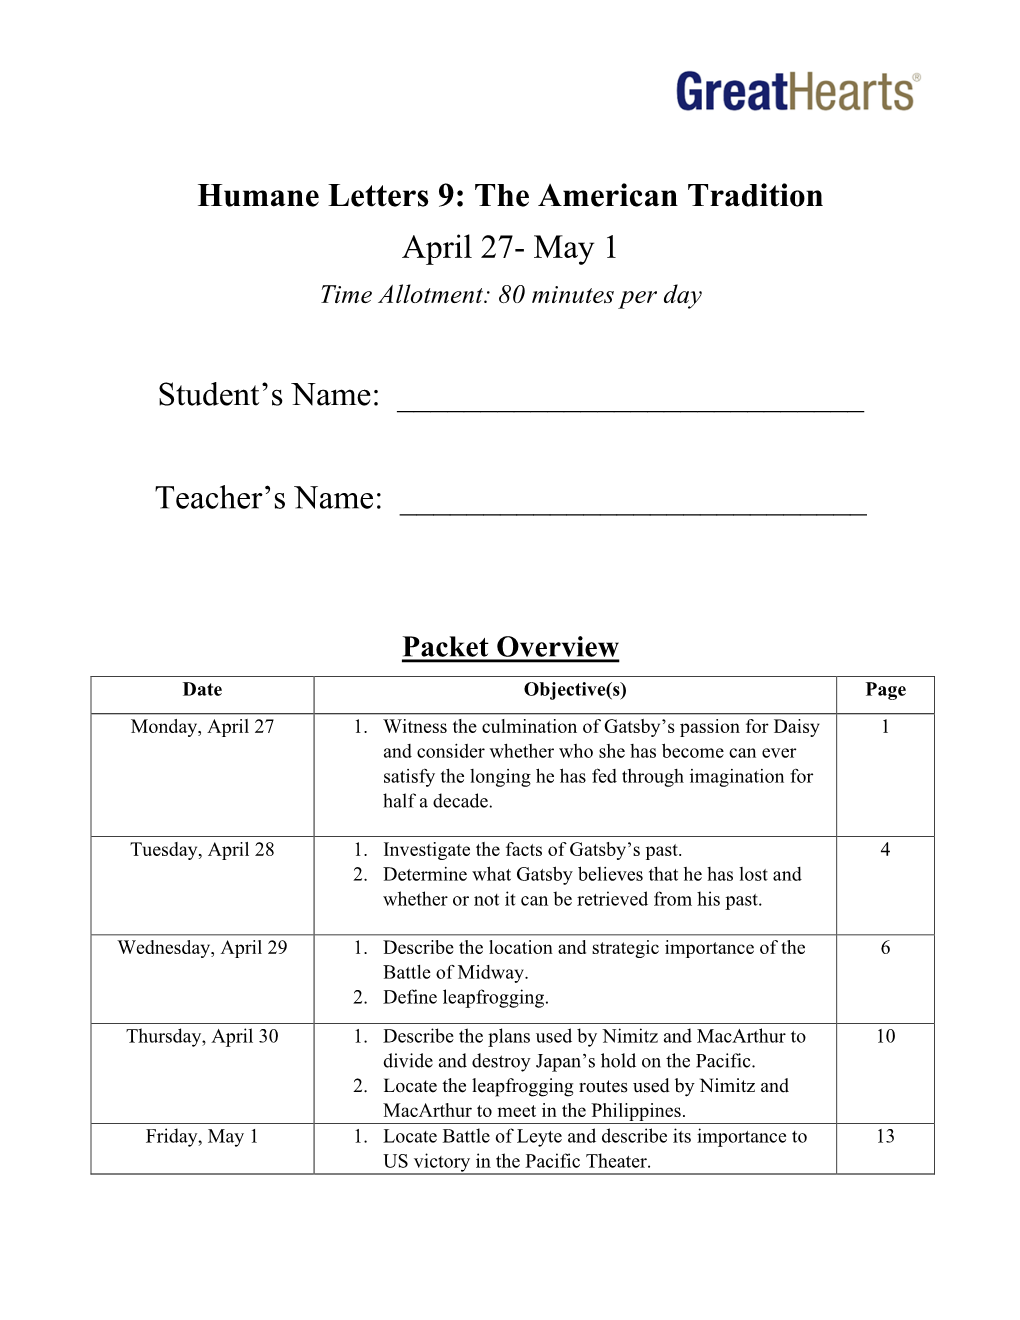 Humane Letters 9: the American Tradition April 27- May 1 Time Allotment: 80 Minutes Per Day